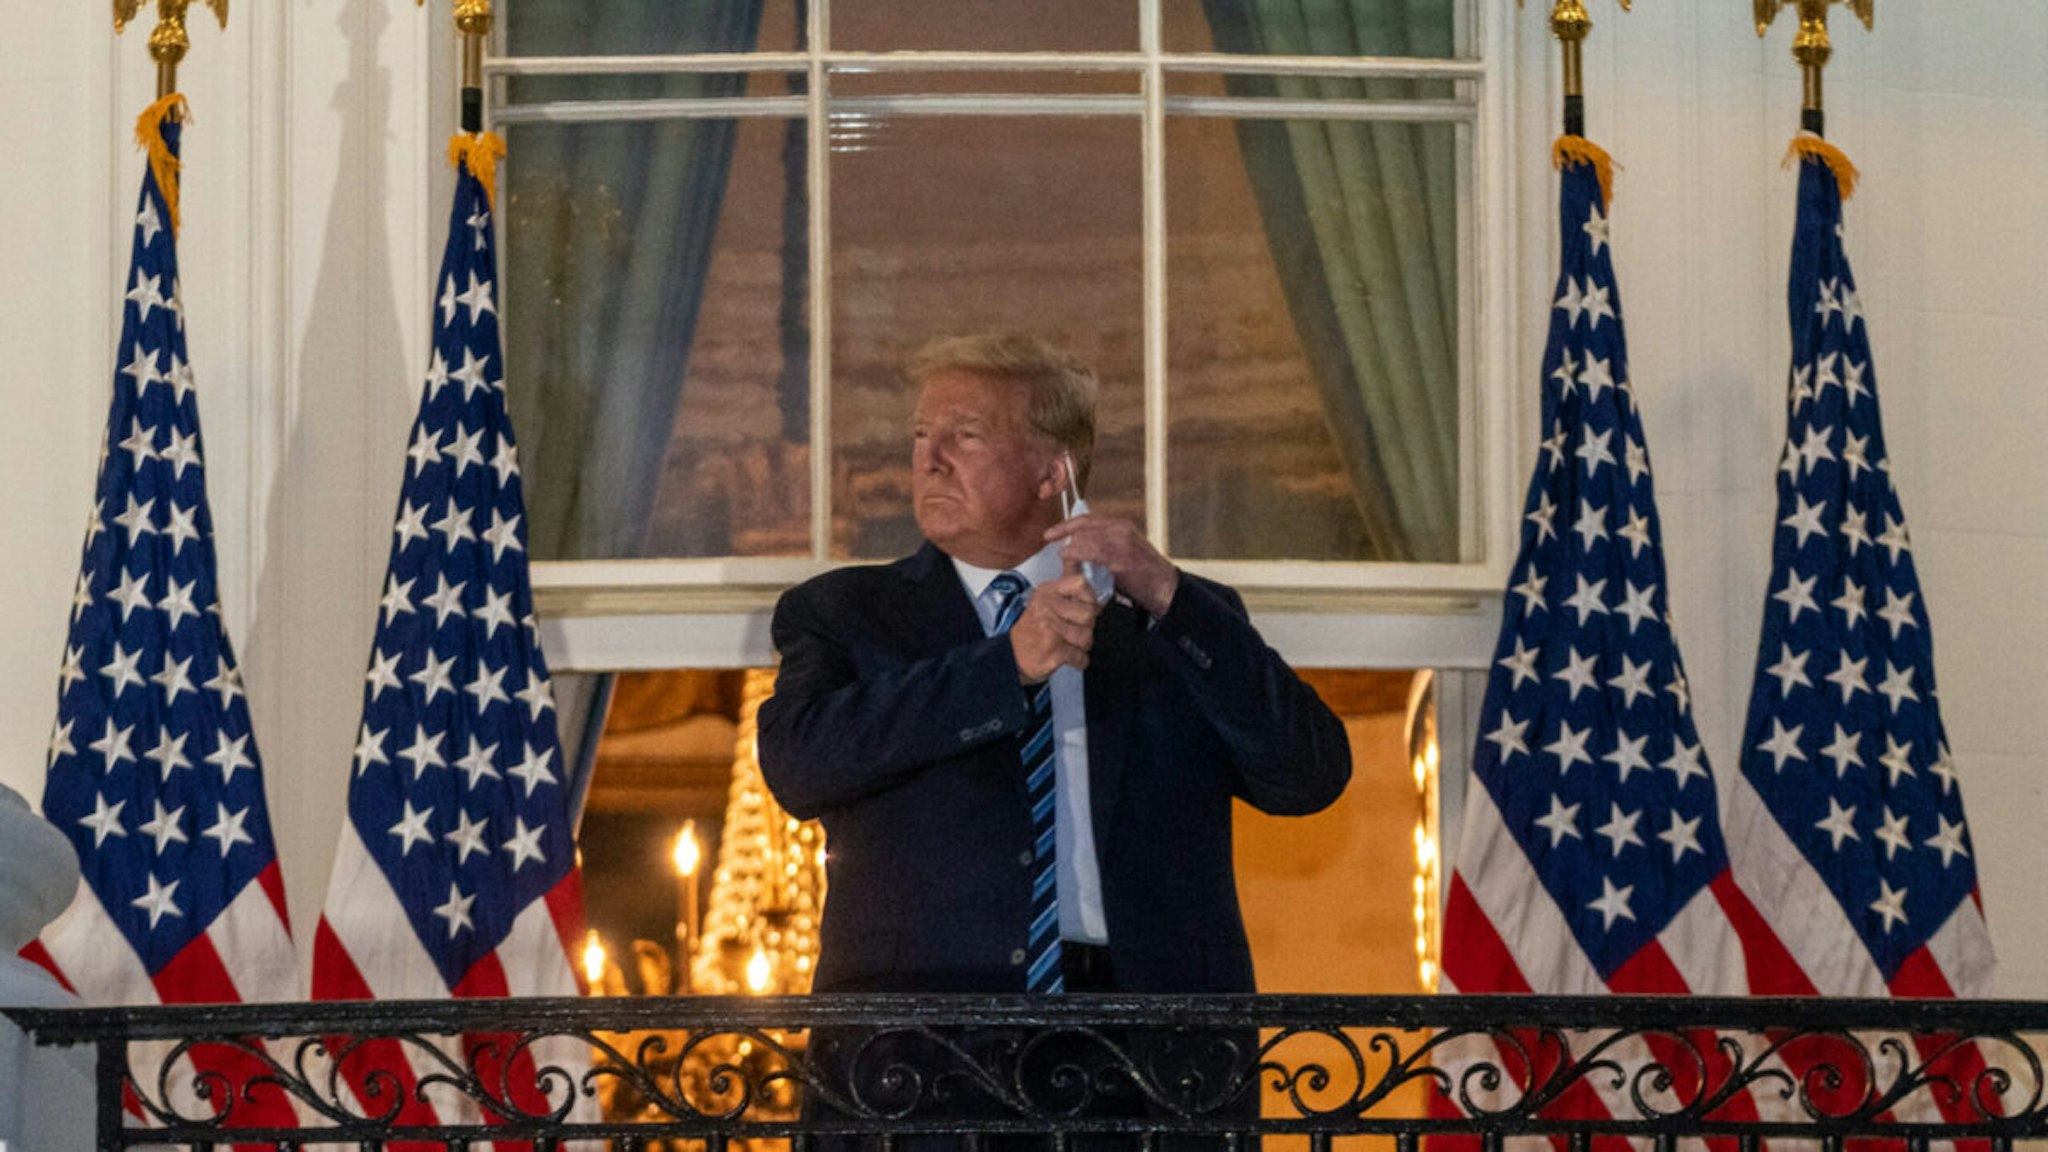 U.S. President Donald Trump removes his protective mask while on the Truman Balcony of the White House after being discharged from the Walter Reed National Military Medical Center with Covid-19 in Washington, D.C., U.S., on Monday, Oct. 5, 2020.